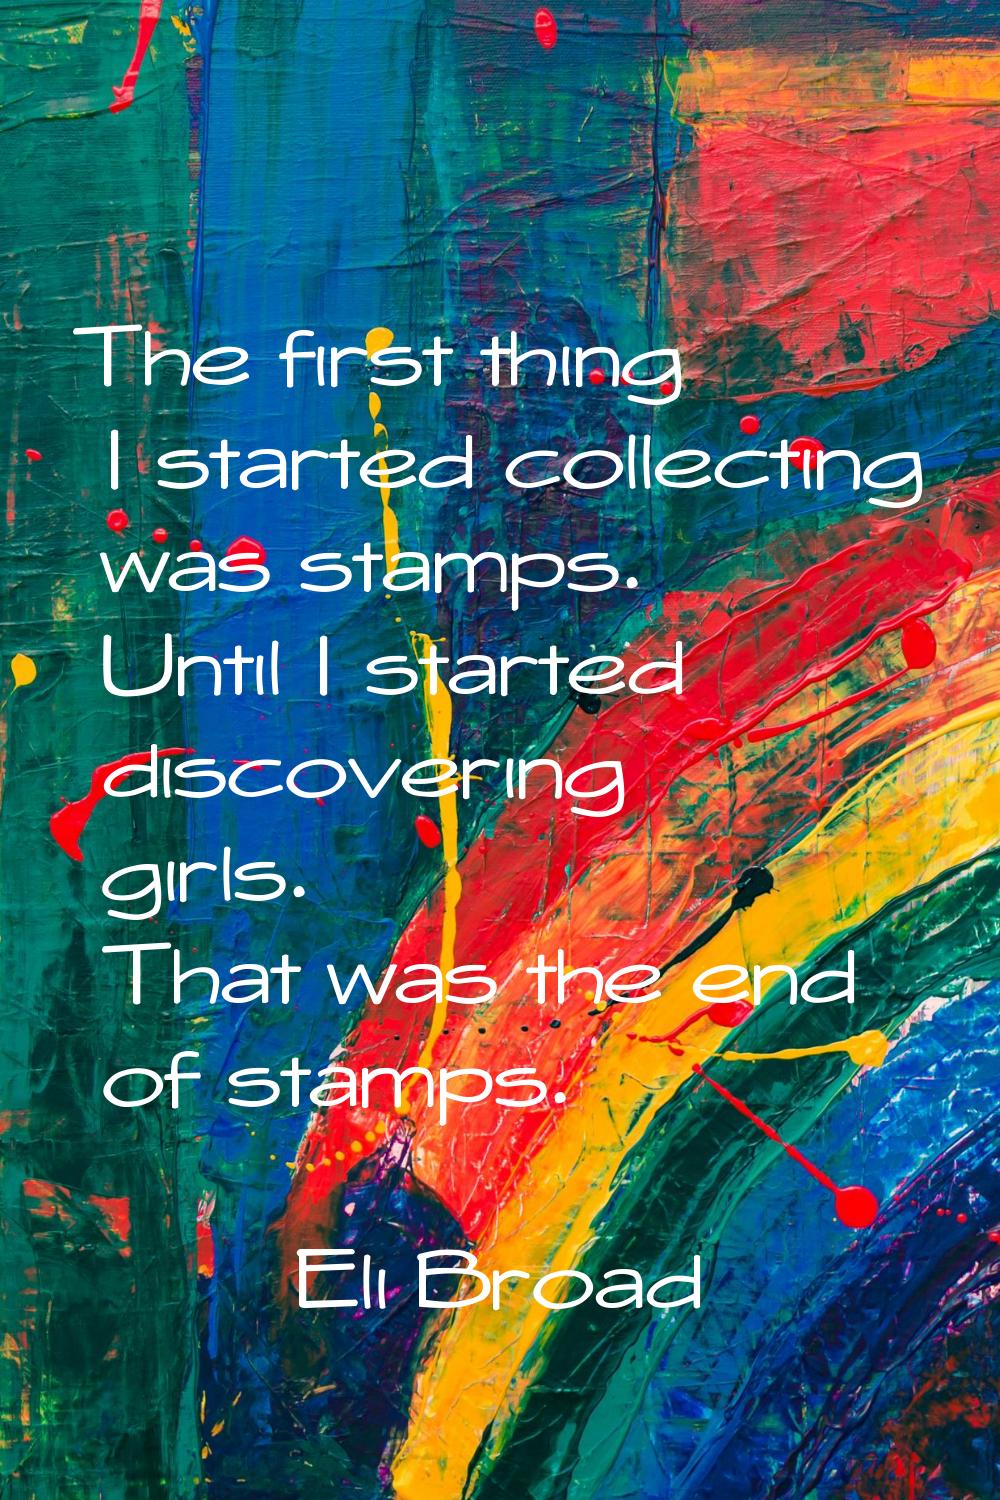 The first thing I started collecting was stamps. Until I started discovering girls. That was the en